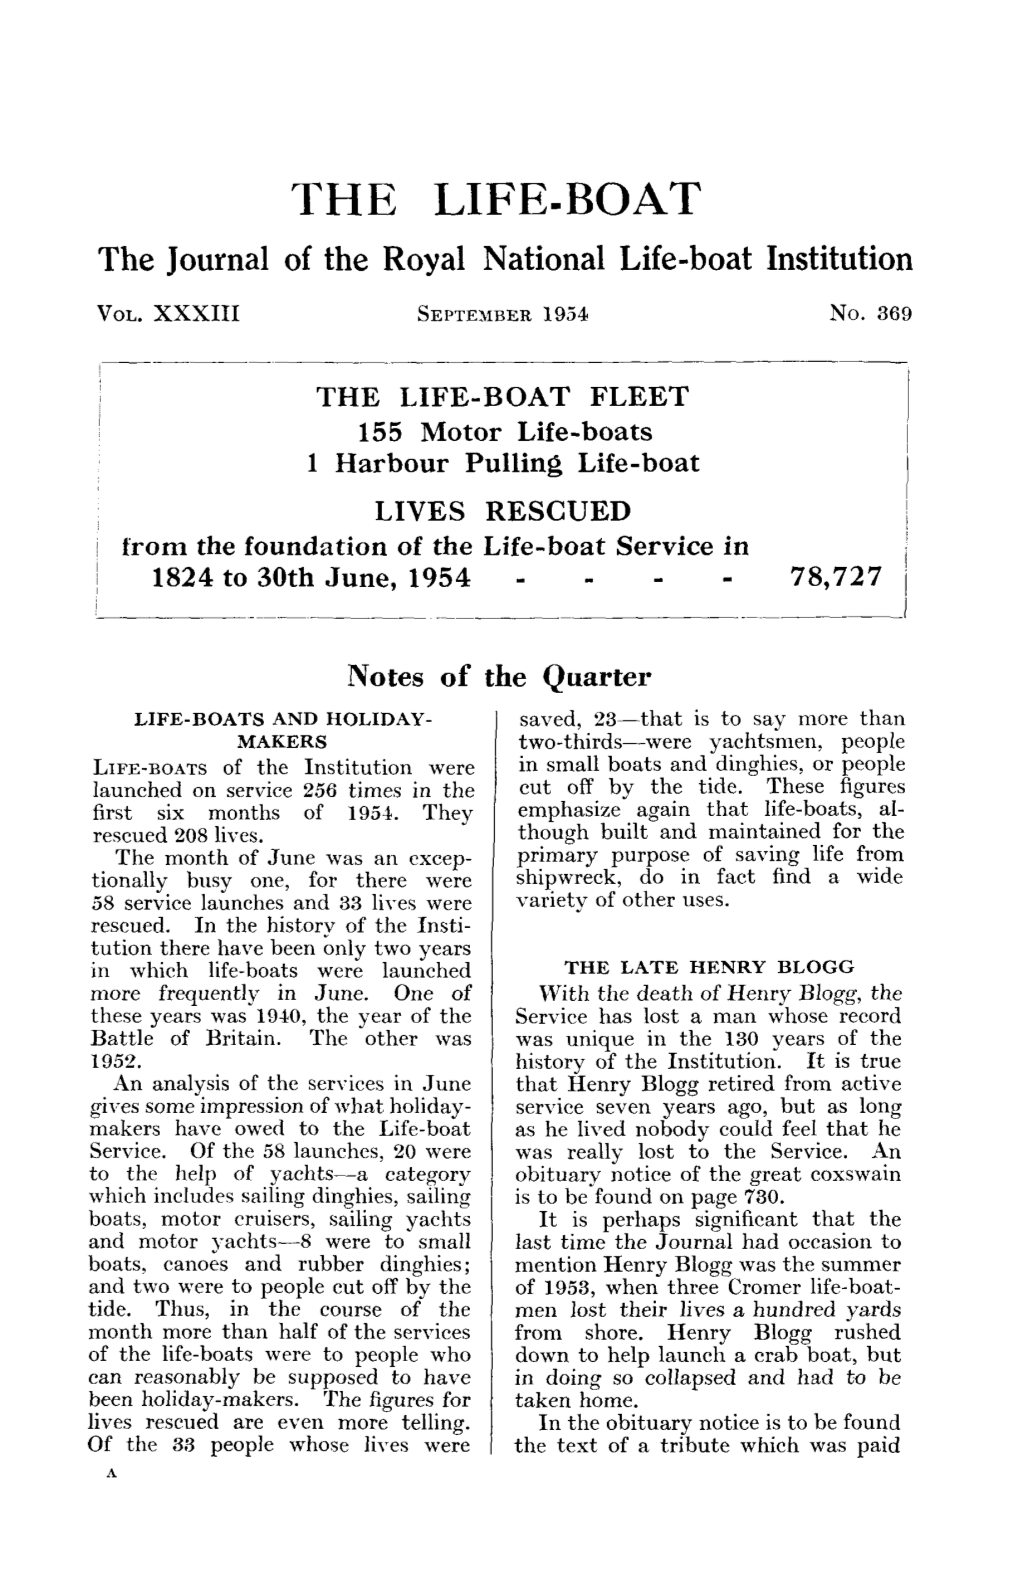 THE LIFE-BOAT the Journal of the Royal National Life-Boat Institution VOL